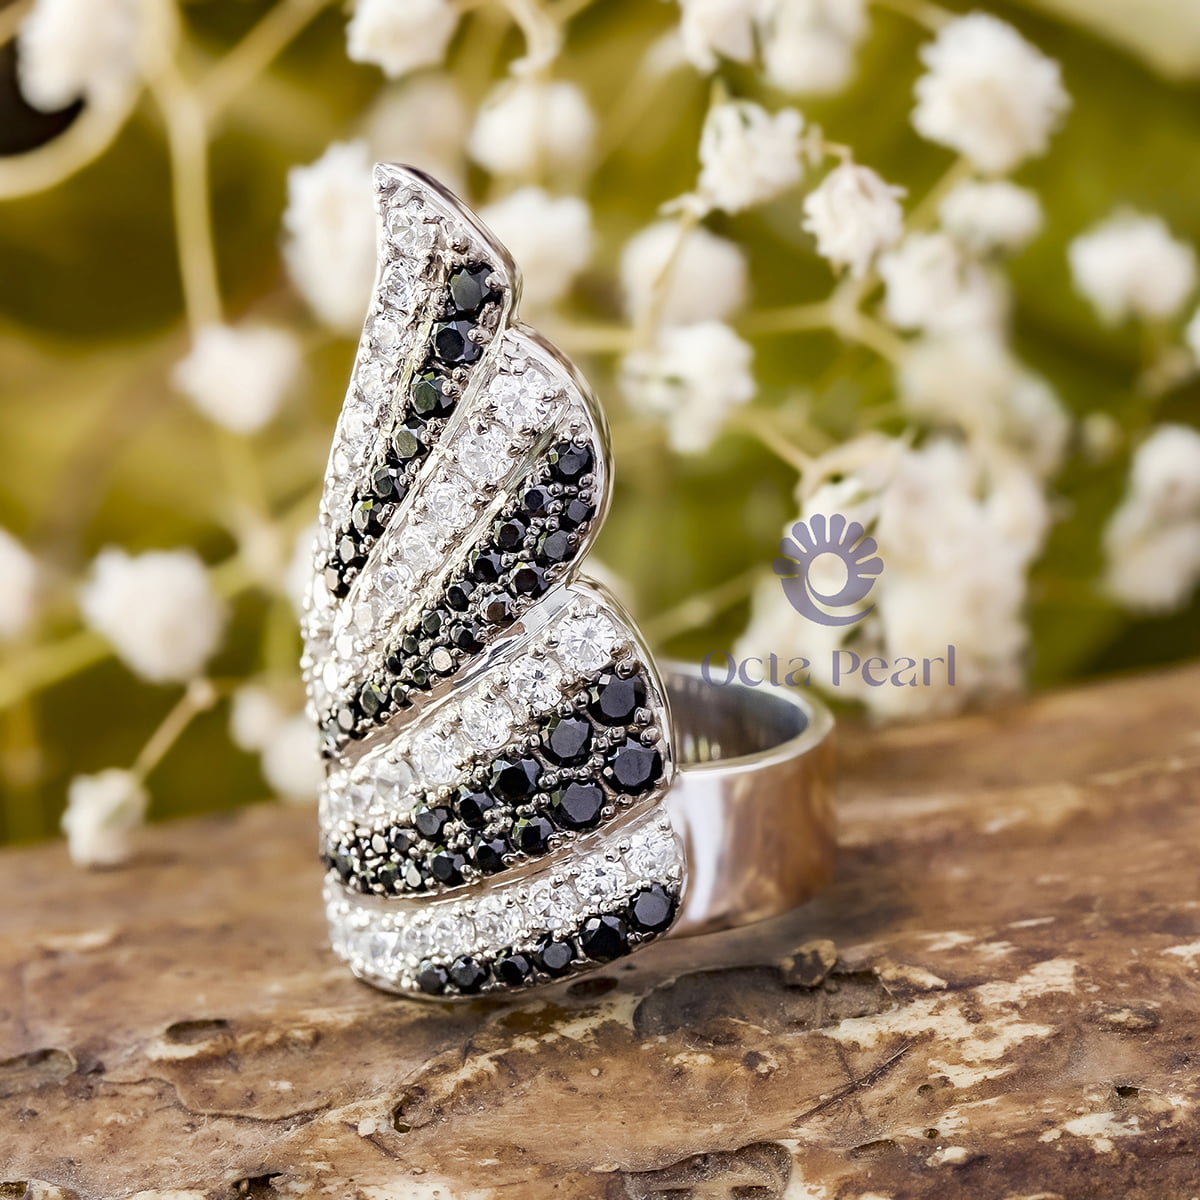 Black & White Round Cut CZ Stone Feather Inspired Cocktail Pave Set Party Wear Ring (3 2/10 TCW)